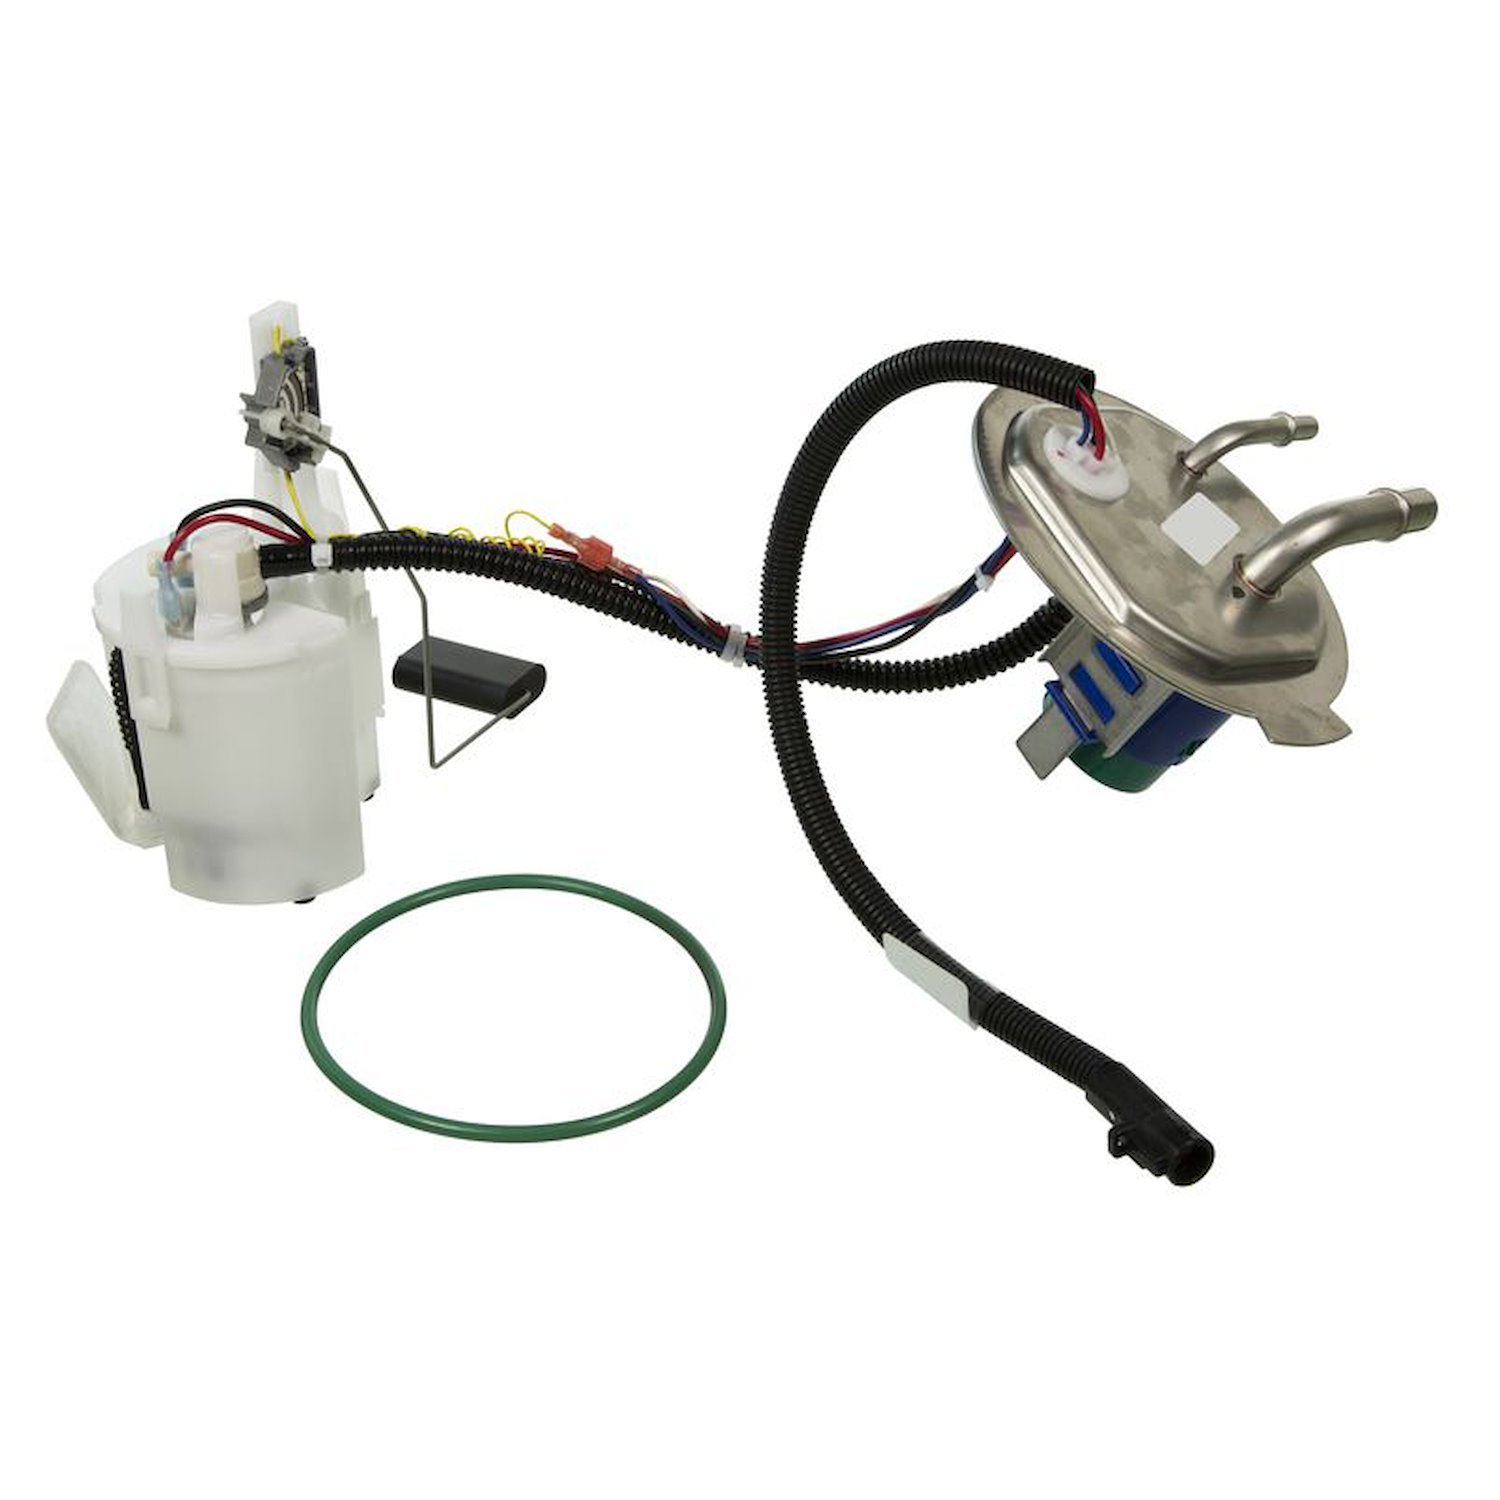 OE Ford Replacement Fuel Pump Module Assembly for 2008-2010 Ford F-250/F-350